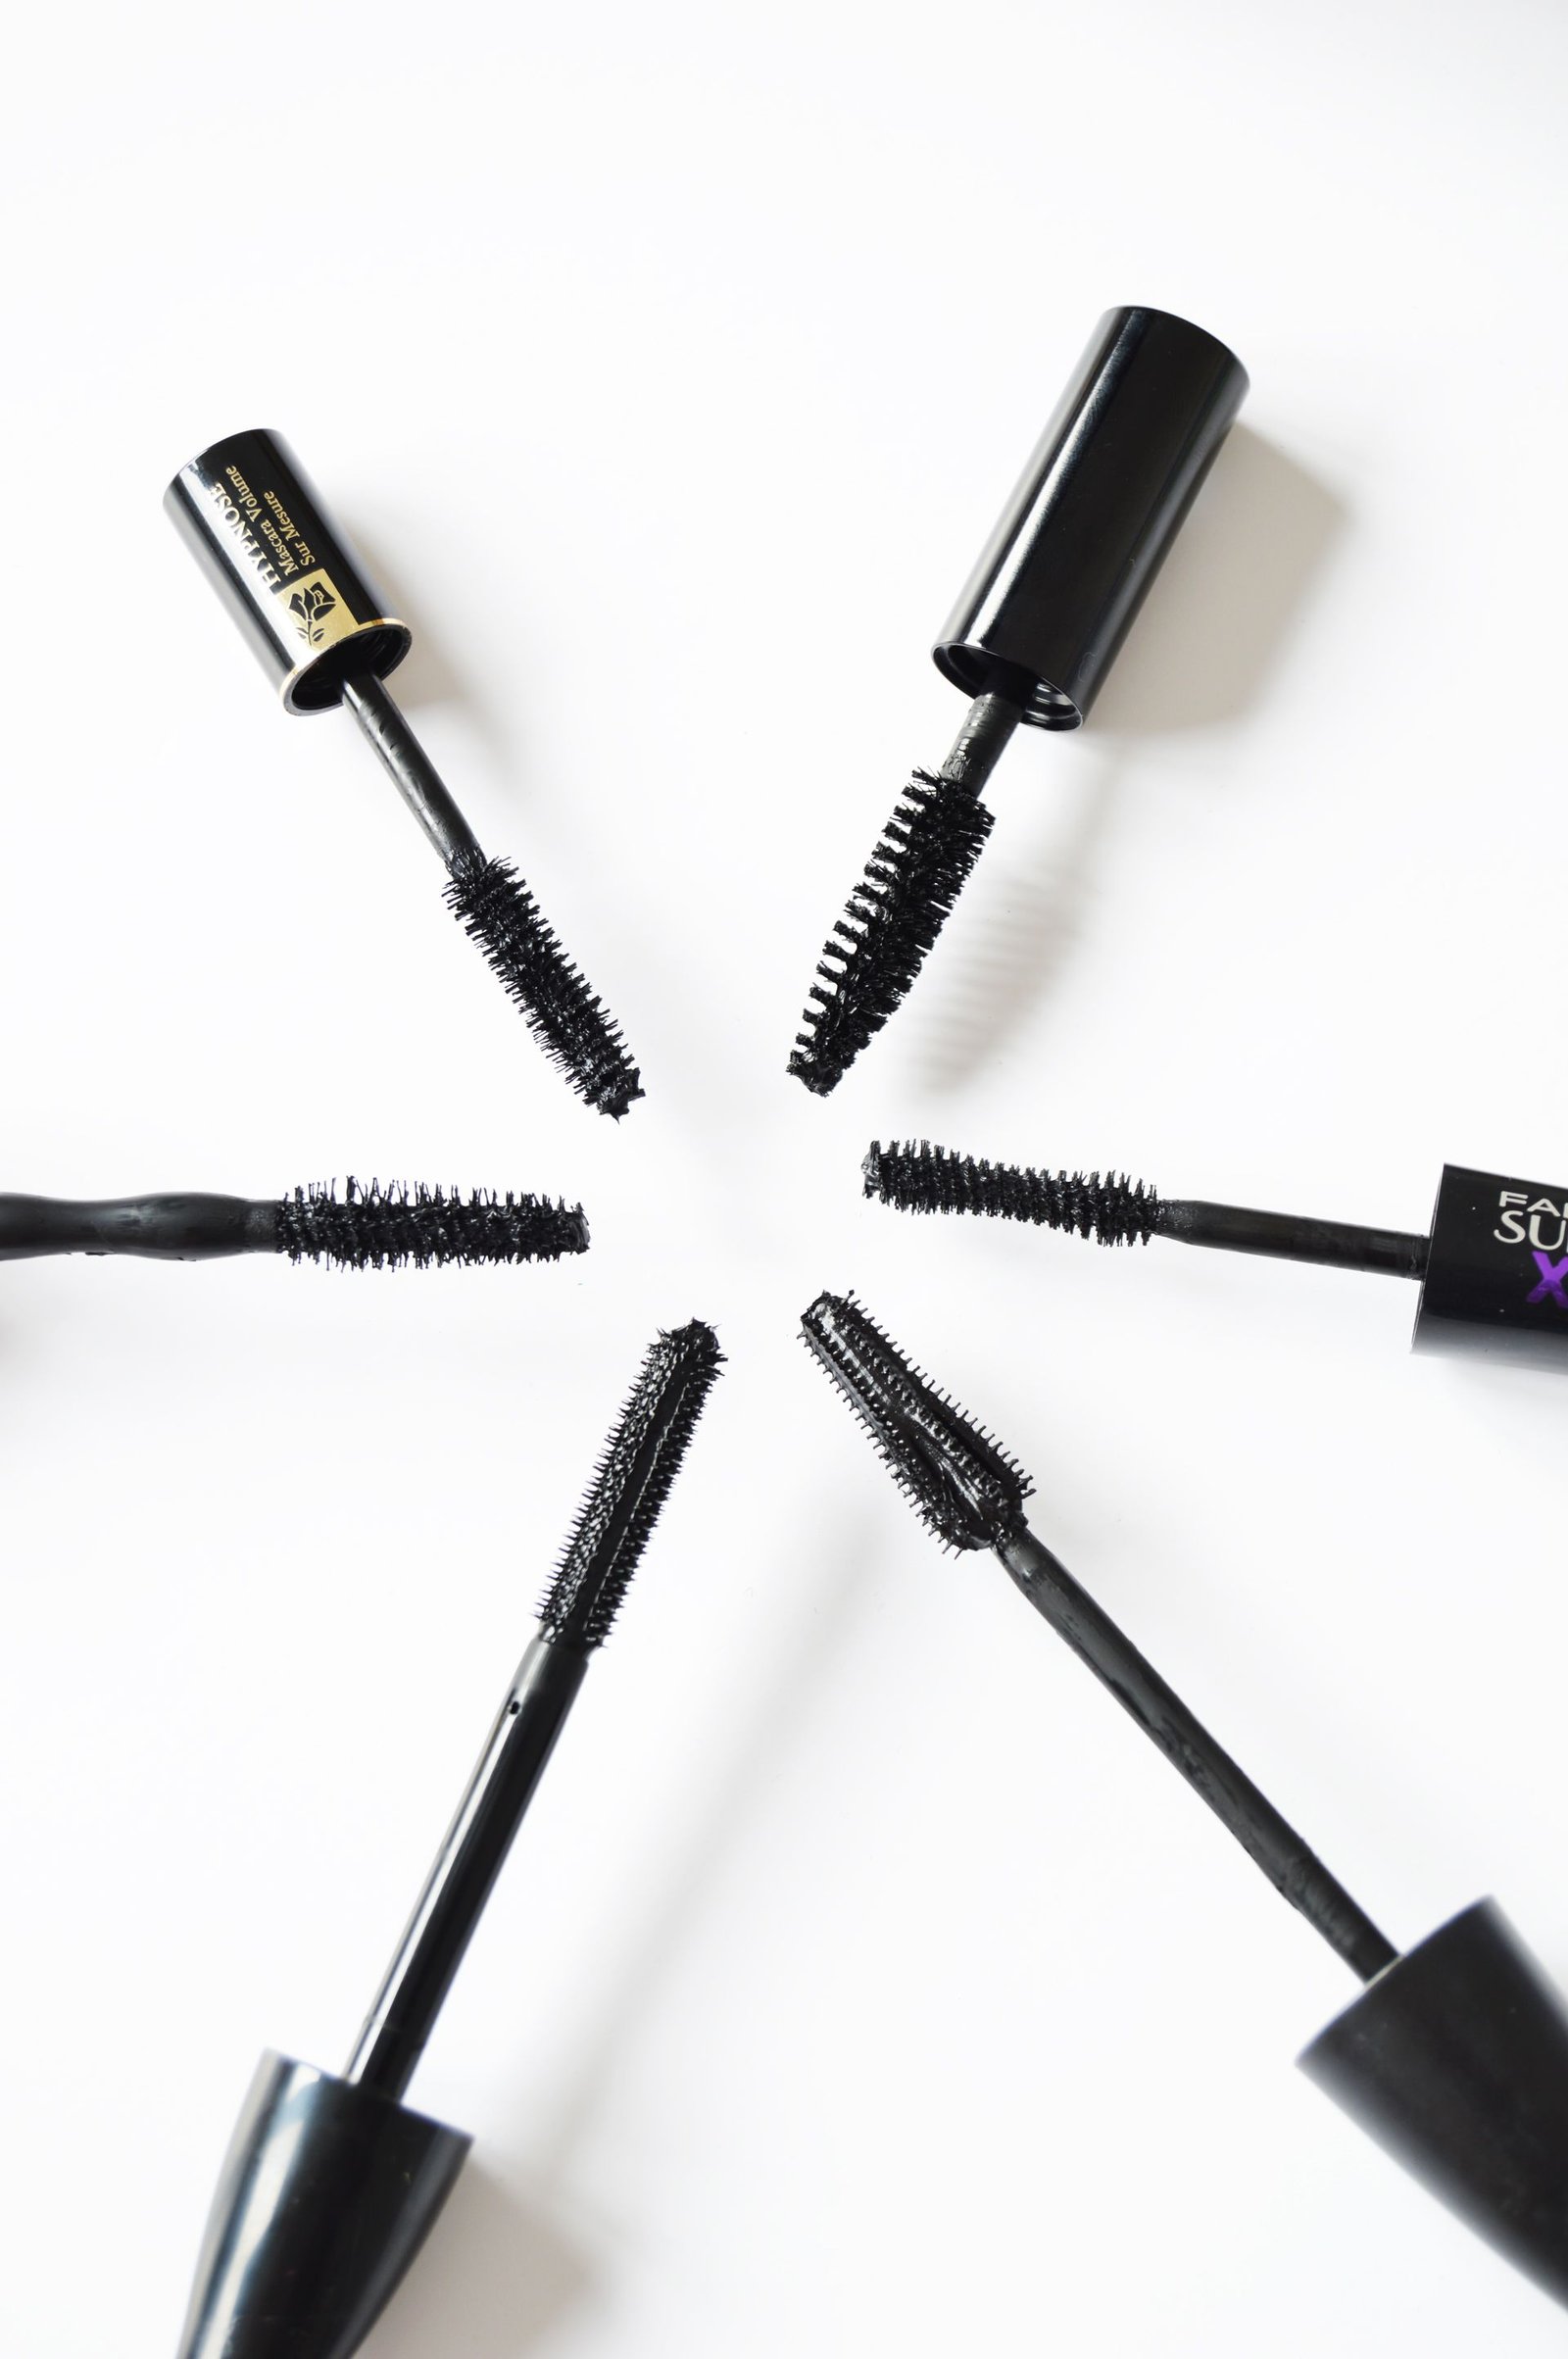 Mascara Roundup | Best and Worst. Maybelline Lash Sensational Lucious Waterproof Mascara, Lancome Hypnose Mascara and more... If you want to find out which one is good then keep reading.